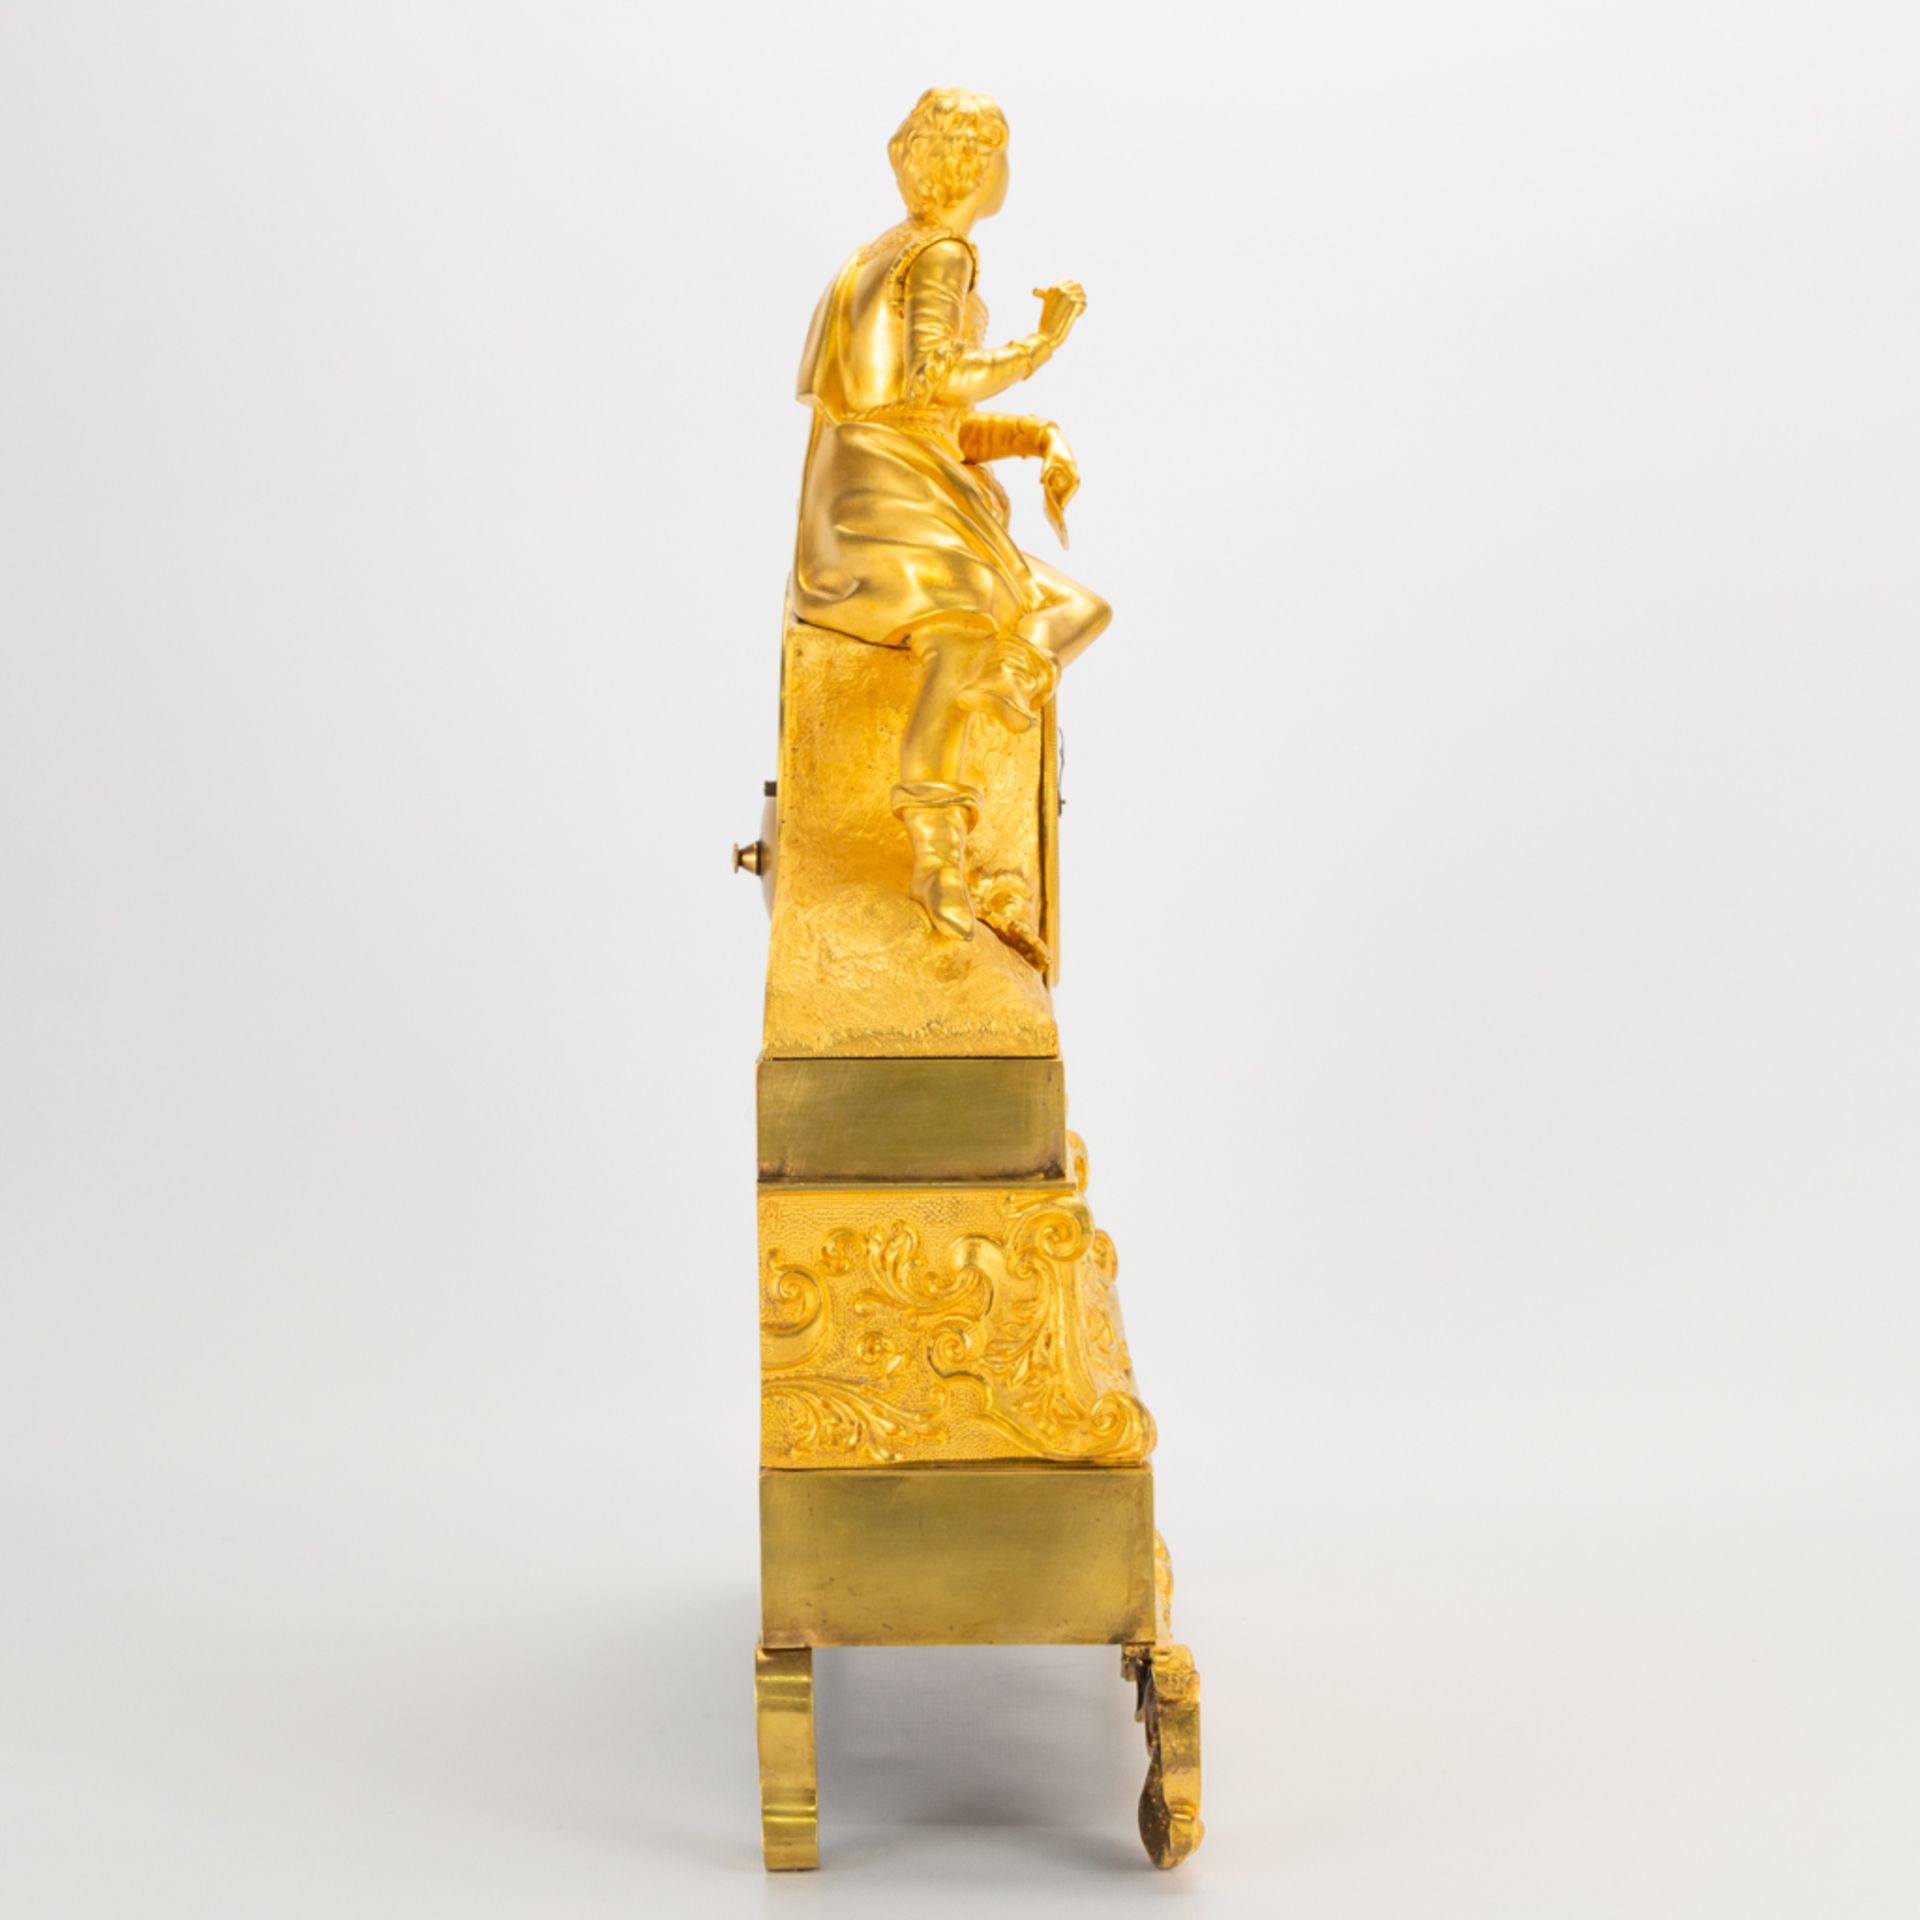 A ormolu gilt table clock made of bronze with a figurine of a noble man, enamel dial and marked Amst - Image 2 of 16